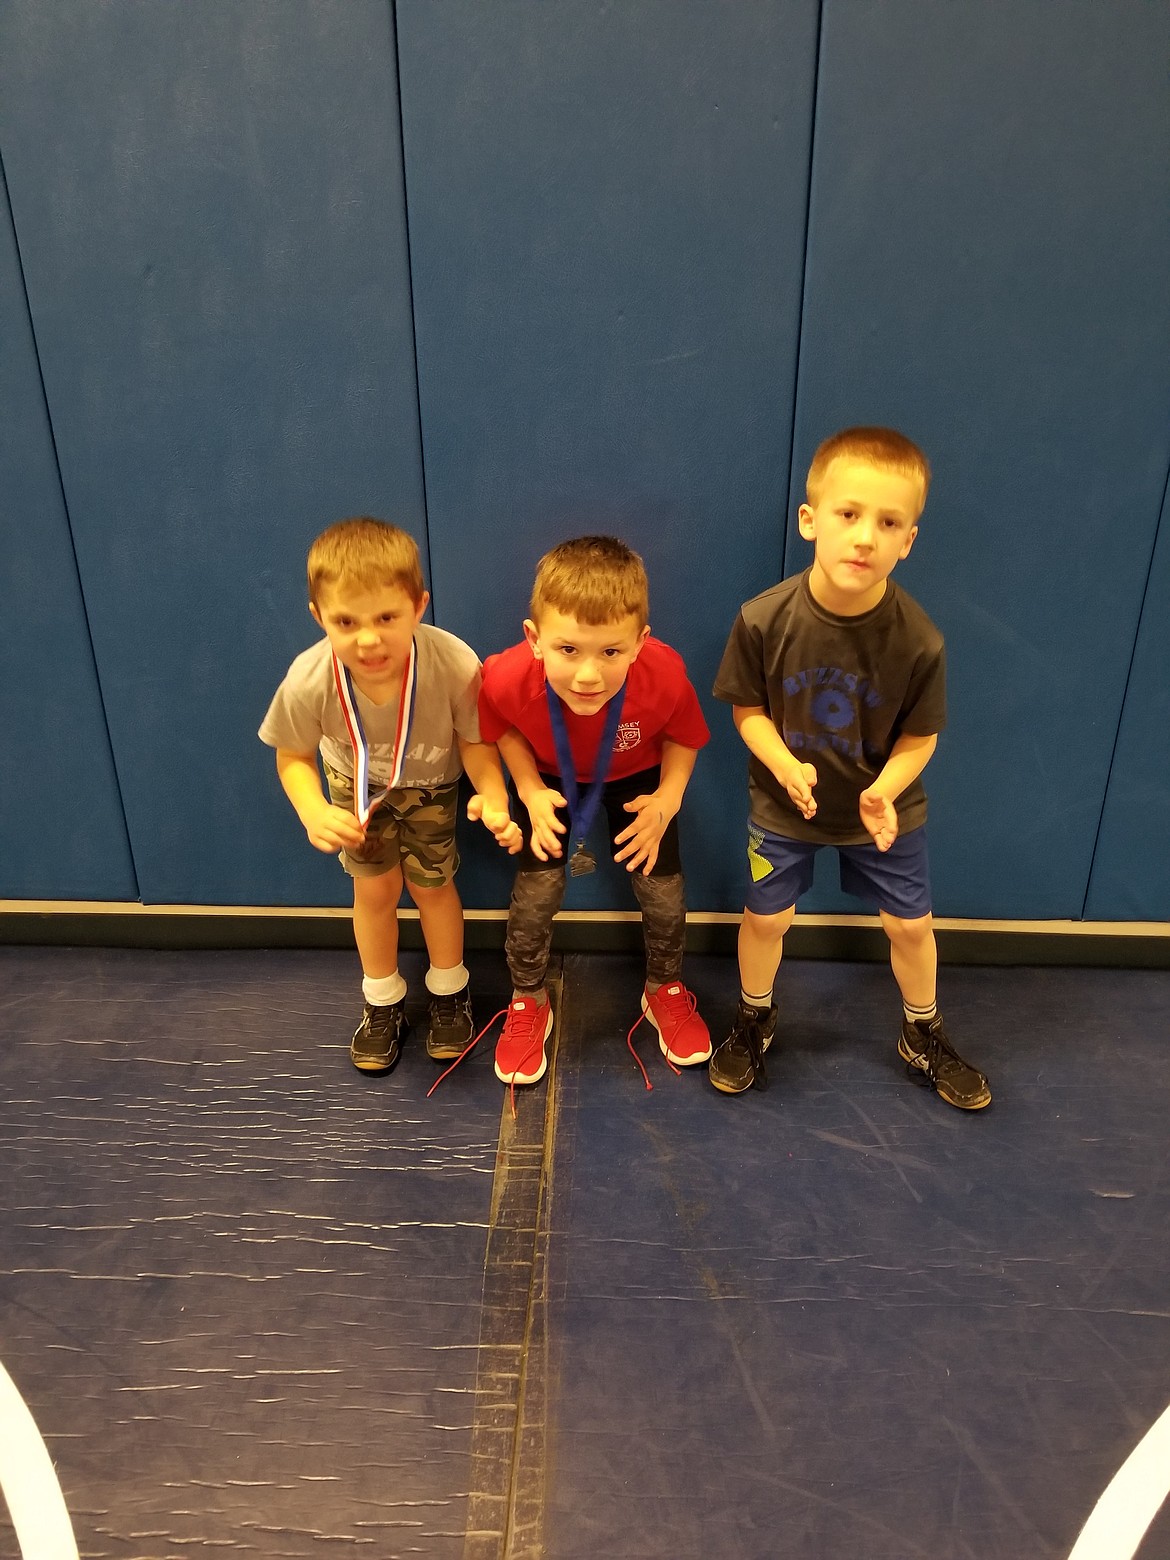 Courtesy photo
Buzzsaw Wrestling Club results from the Big Cat Tournament Feb. 24 at Mead, Wash. From left are Drake Paragamian, 1st place; Colby Adams, 3rd place; and Dallas Hays, 2nd place.